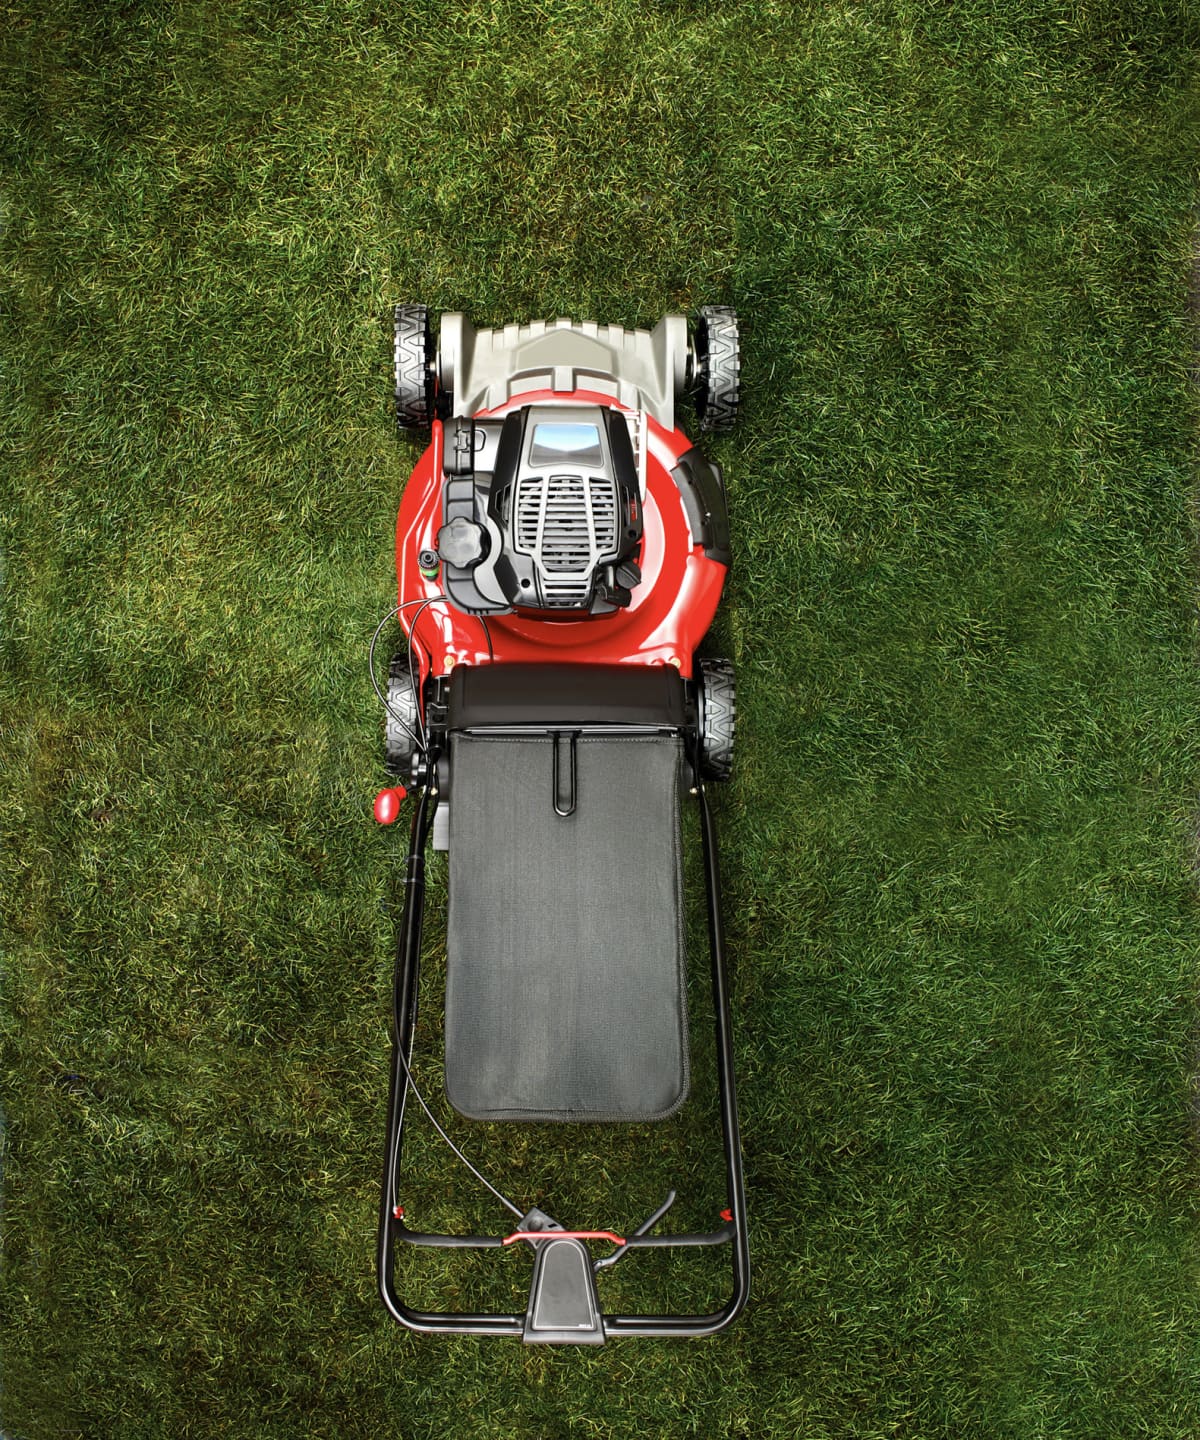 A lawn mower sitting idle on the lawn